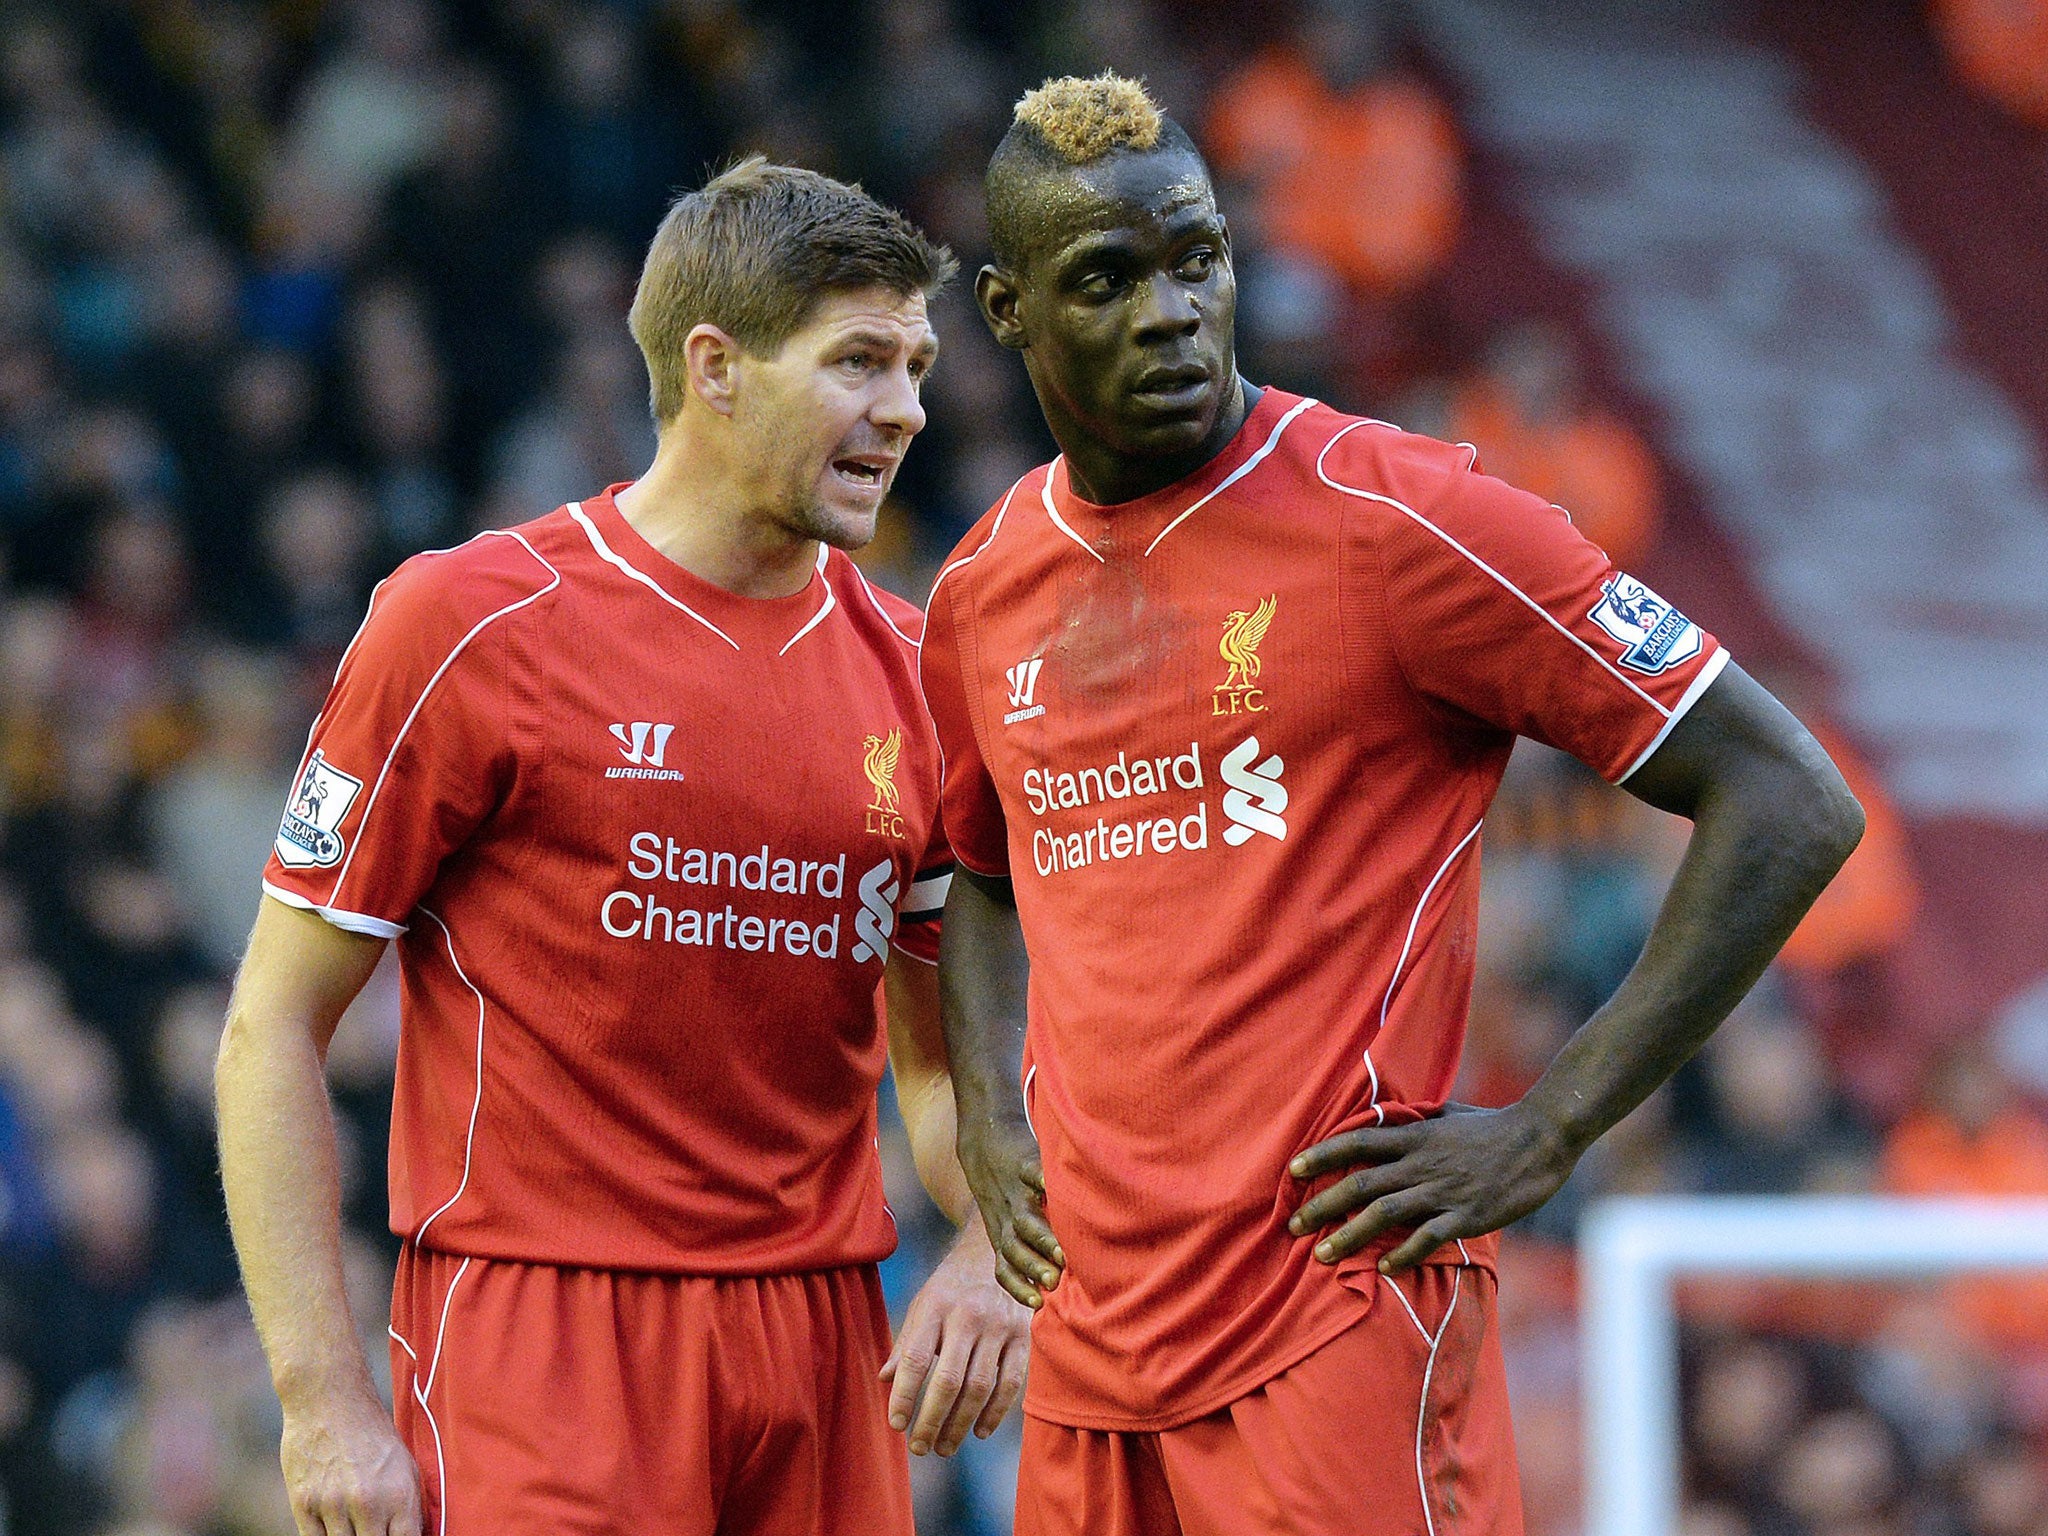 Steven Gerrard and Mario Balotelli in action for Liverpool